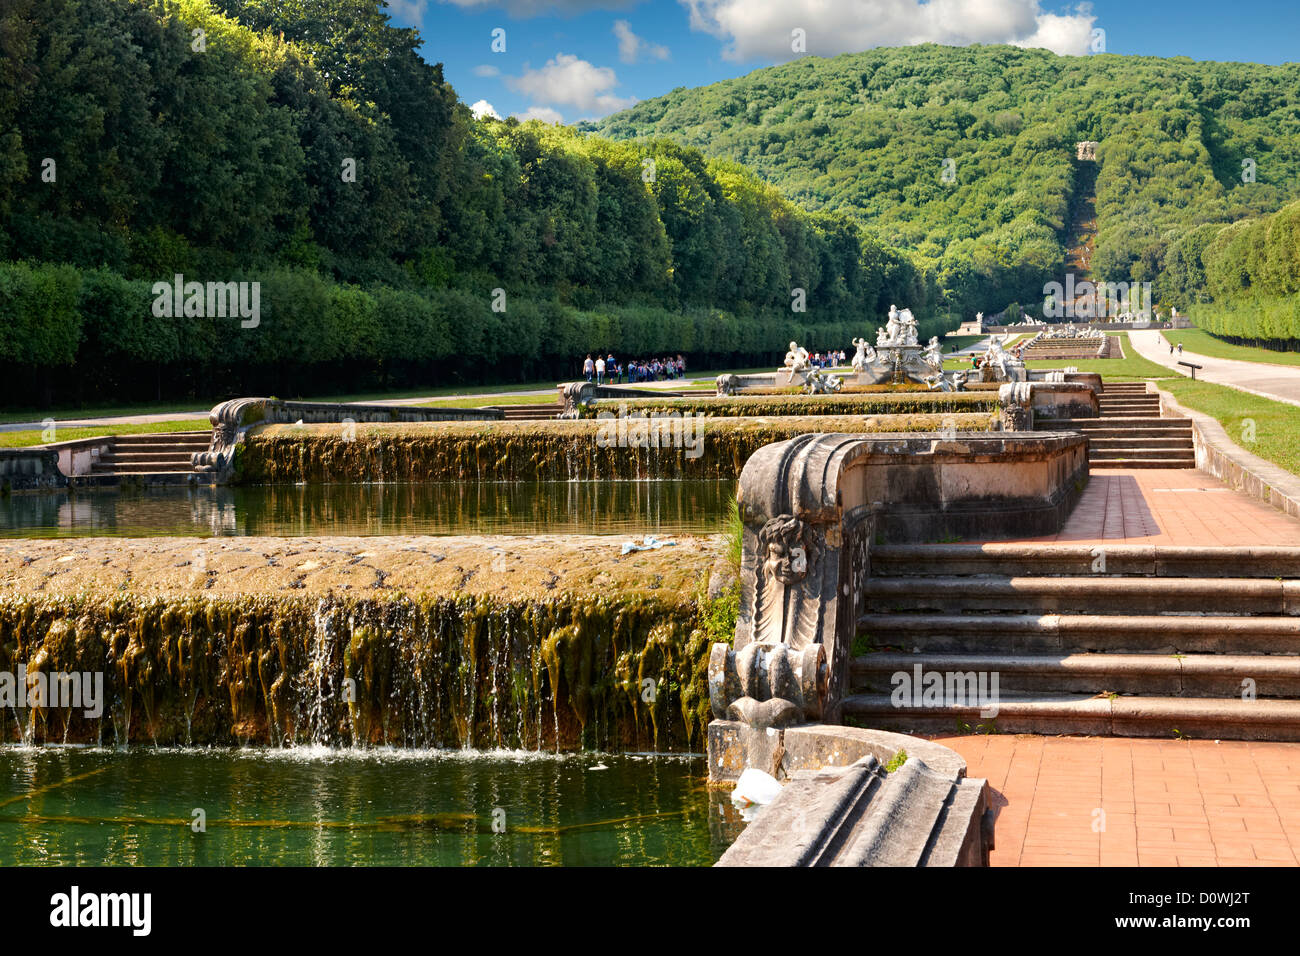 Royal Park of the Palace of Caserta - Ceres Fountain. The Kings of Naples Royal Palace of Caserta, Italy. Stock Photo